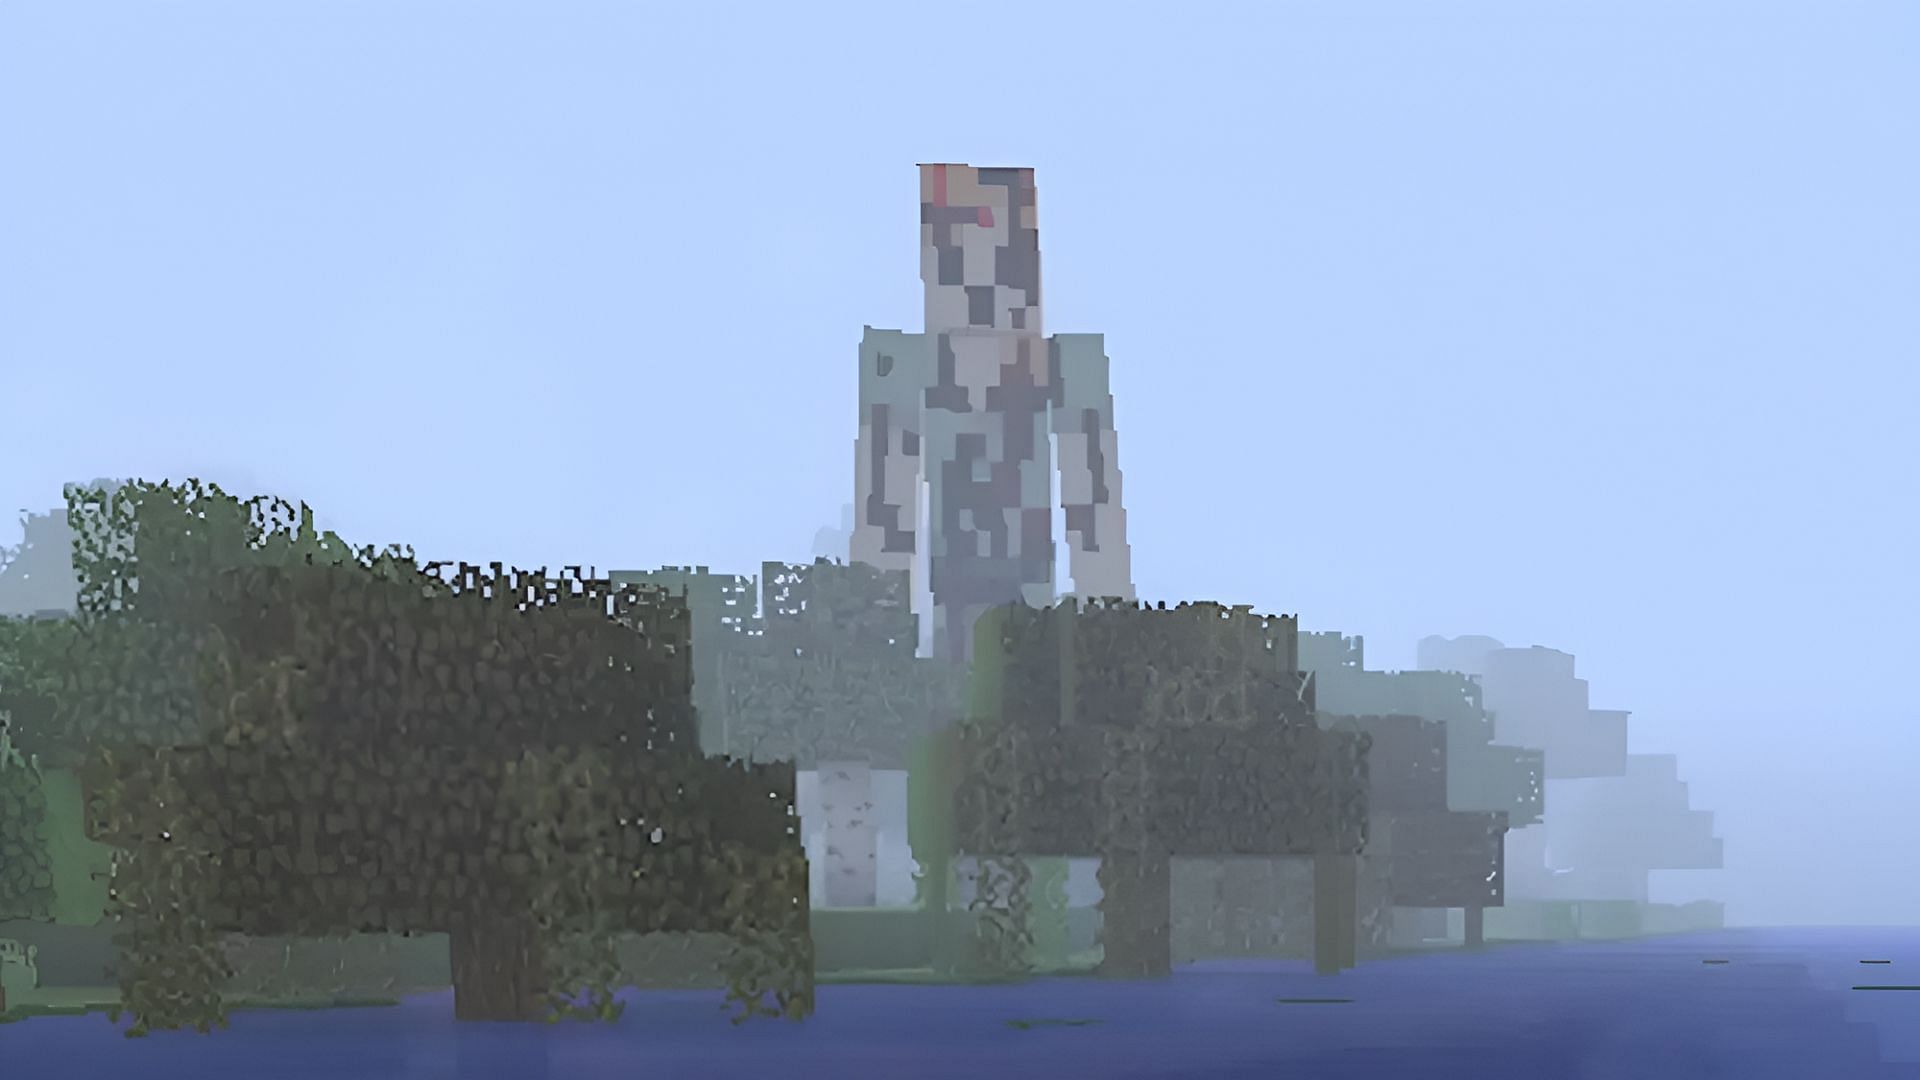 Giant Alex looms over a swamp biome in Minecraft.